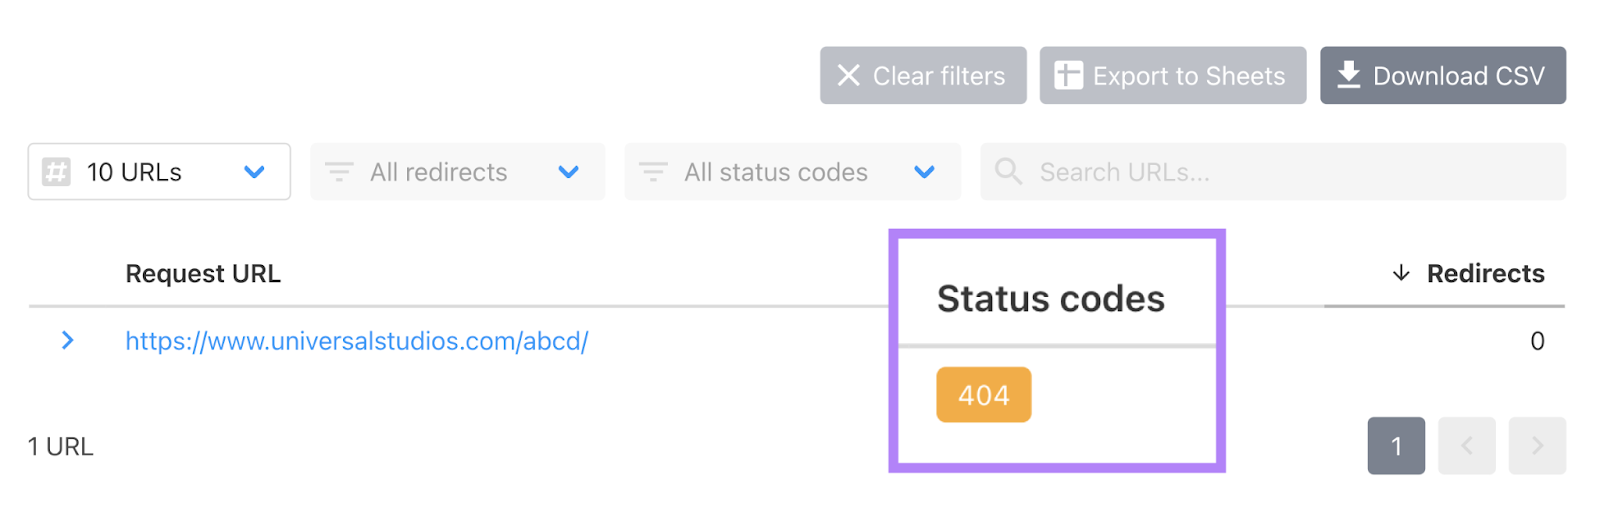 httpstatus.io showing "404" status code for the pasted URL